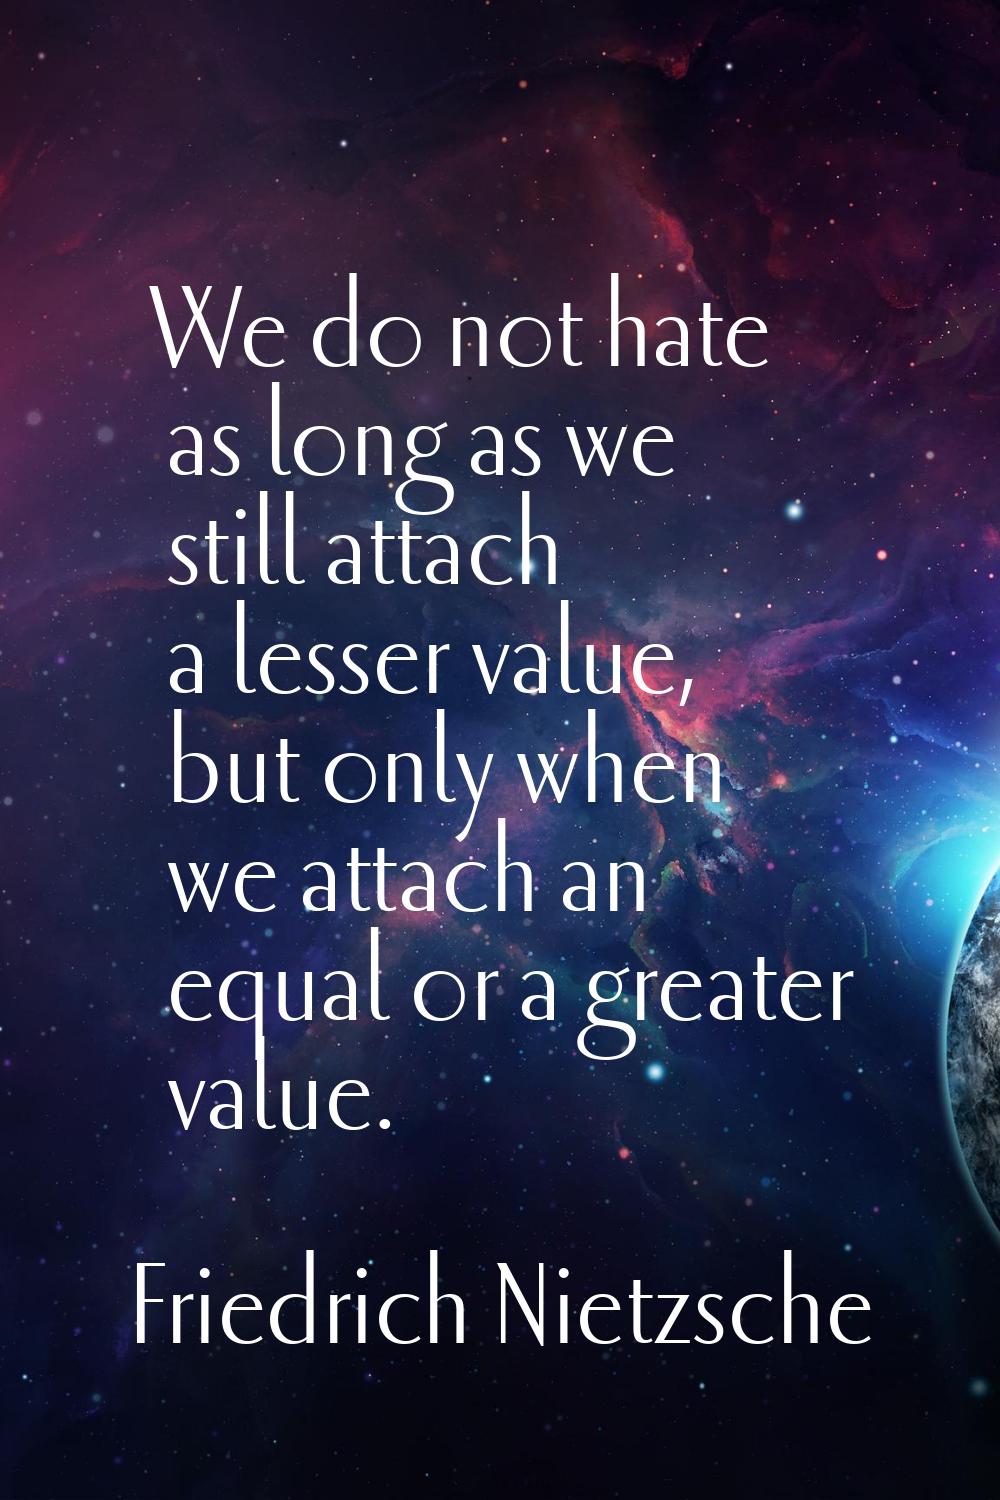 We do not hate as long as we still attach a lesser value, but only when we attach an equal or a gre